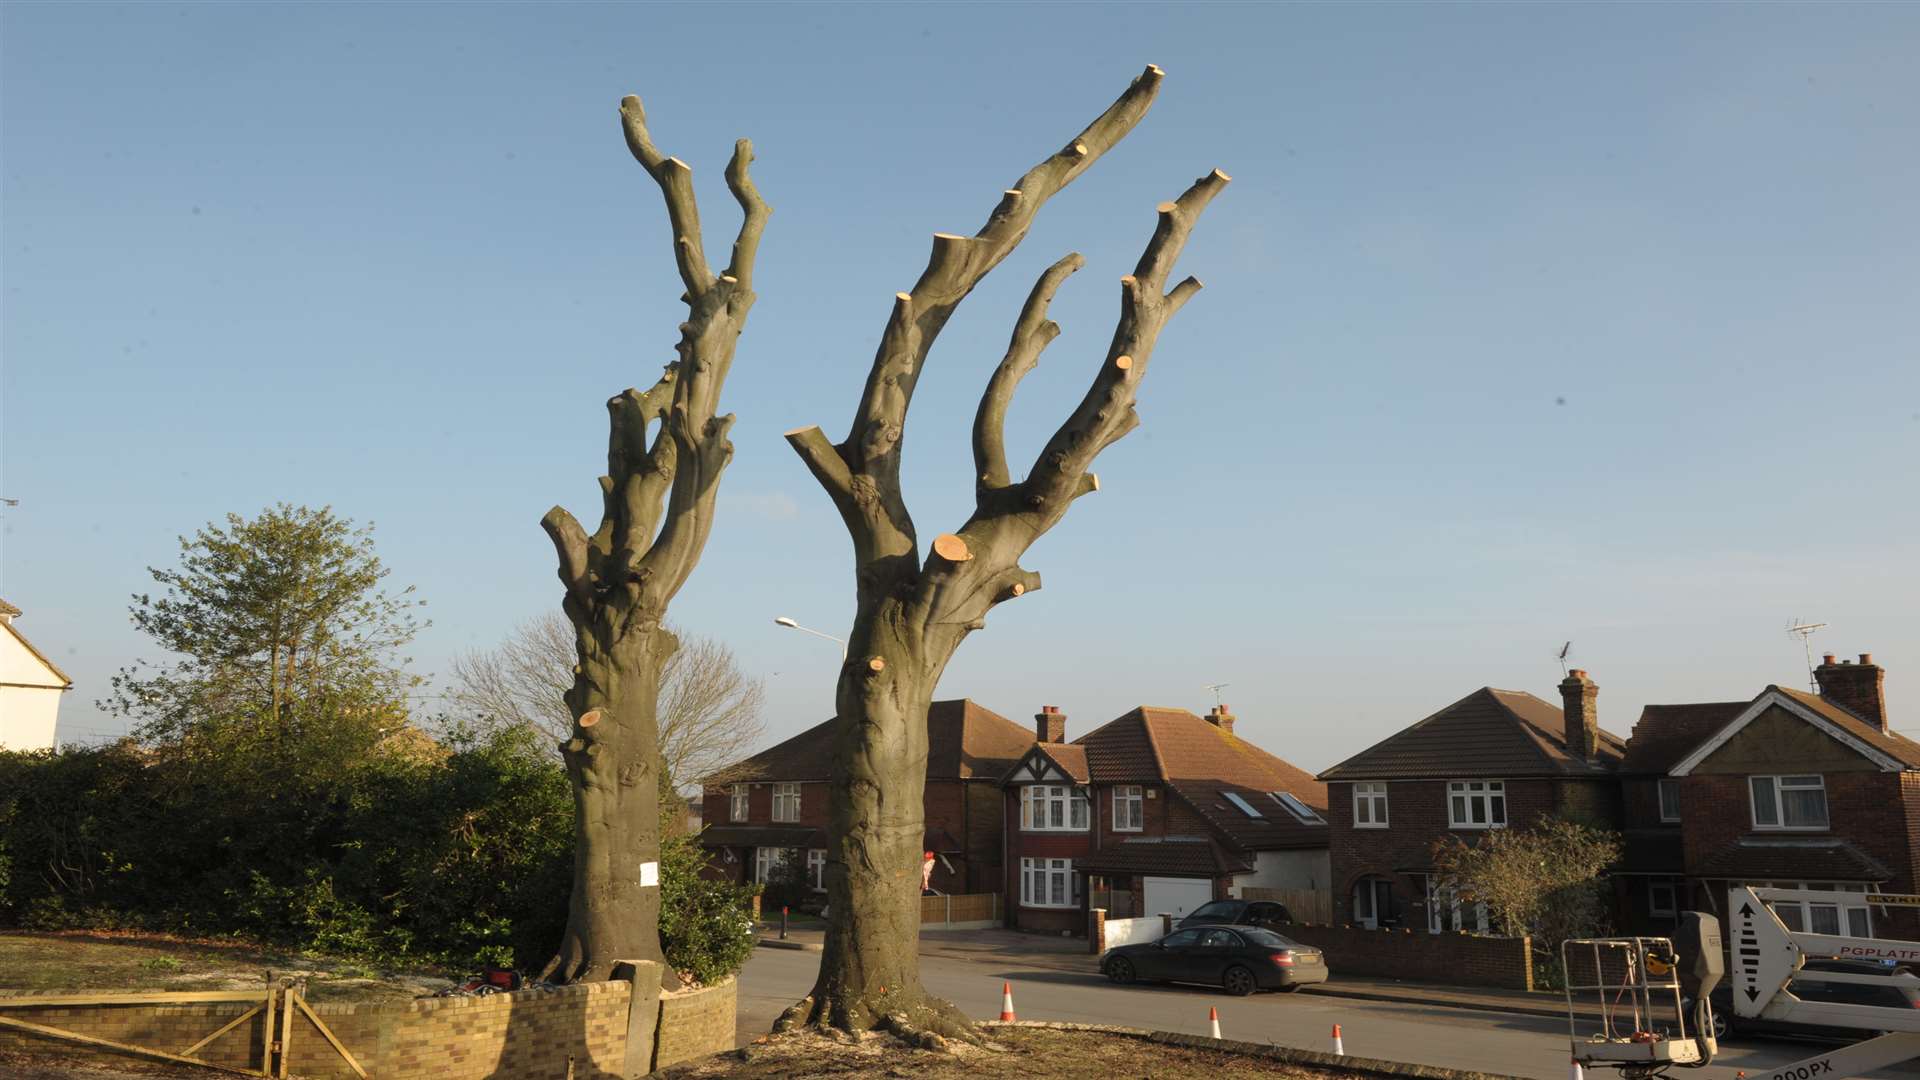 The 80-year-old trees, days before they were cut down